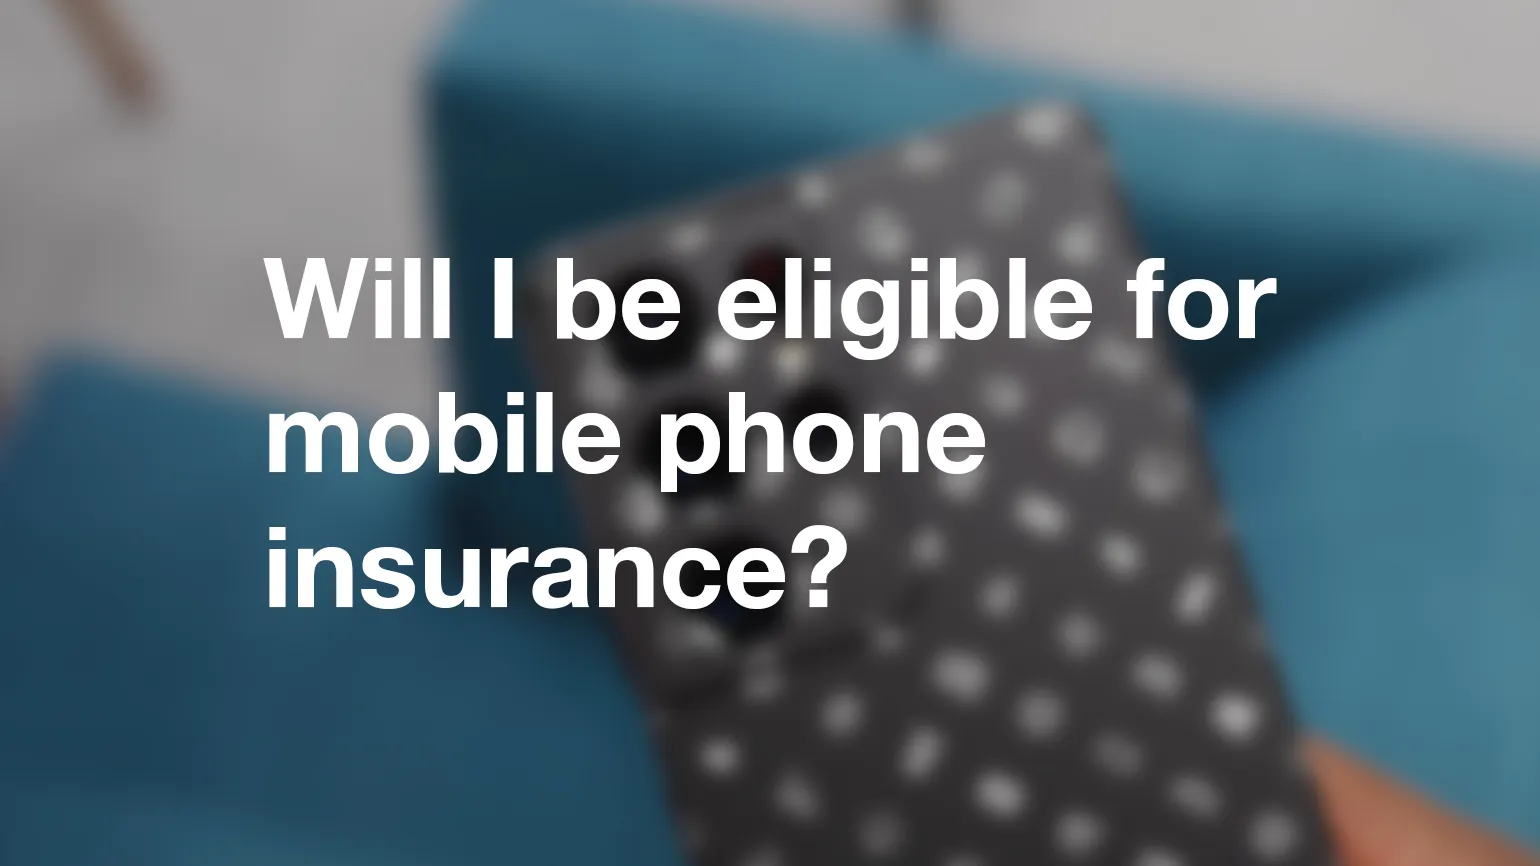 Will I be eligible for mobile phone insurance?